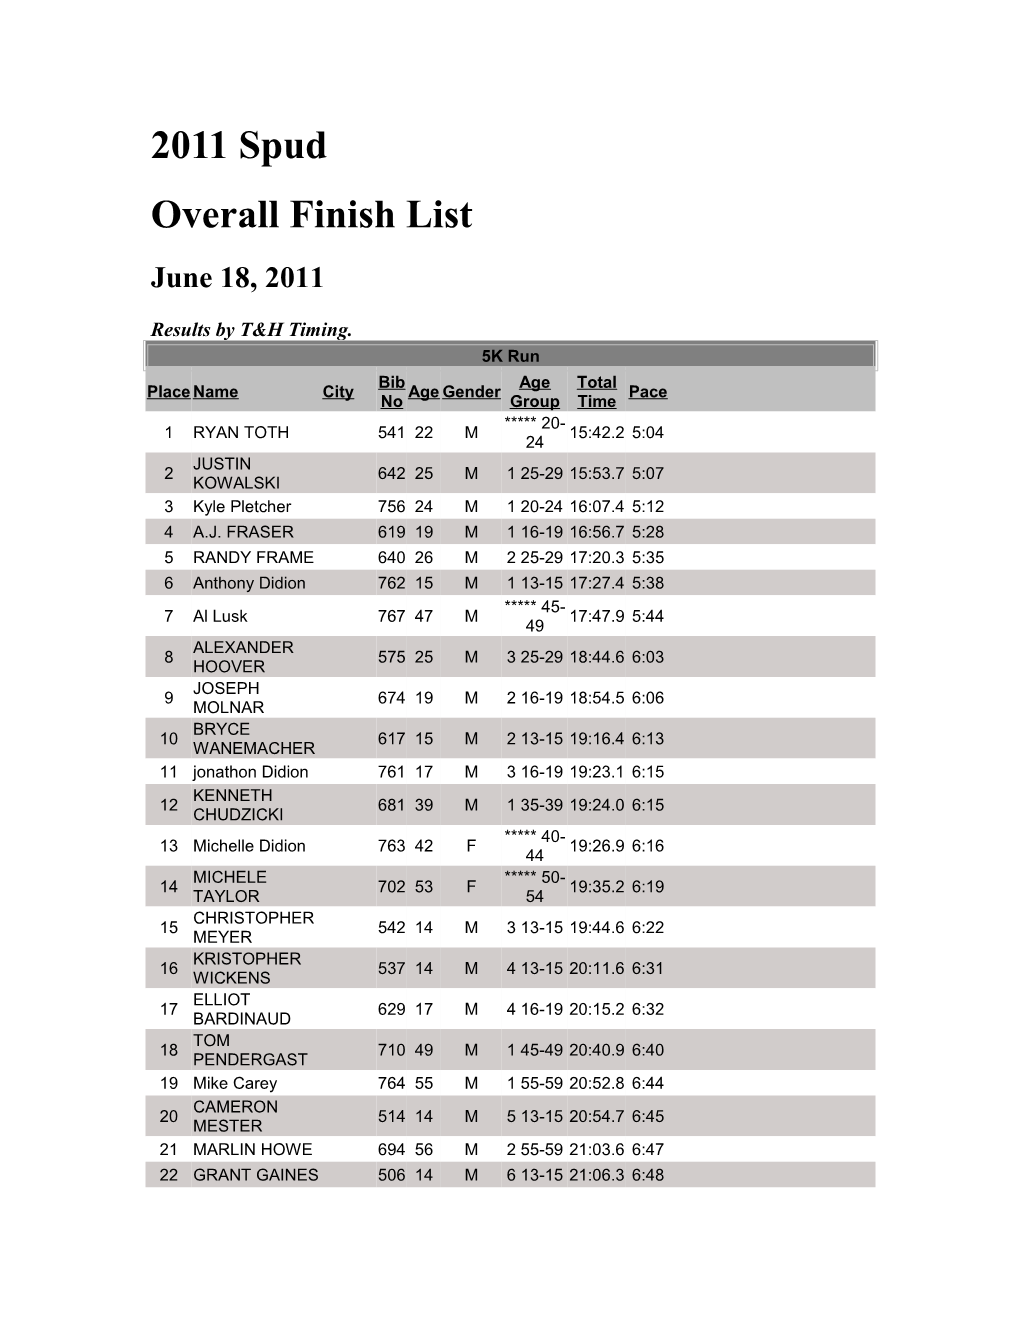 Overall Finish List s4